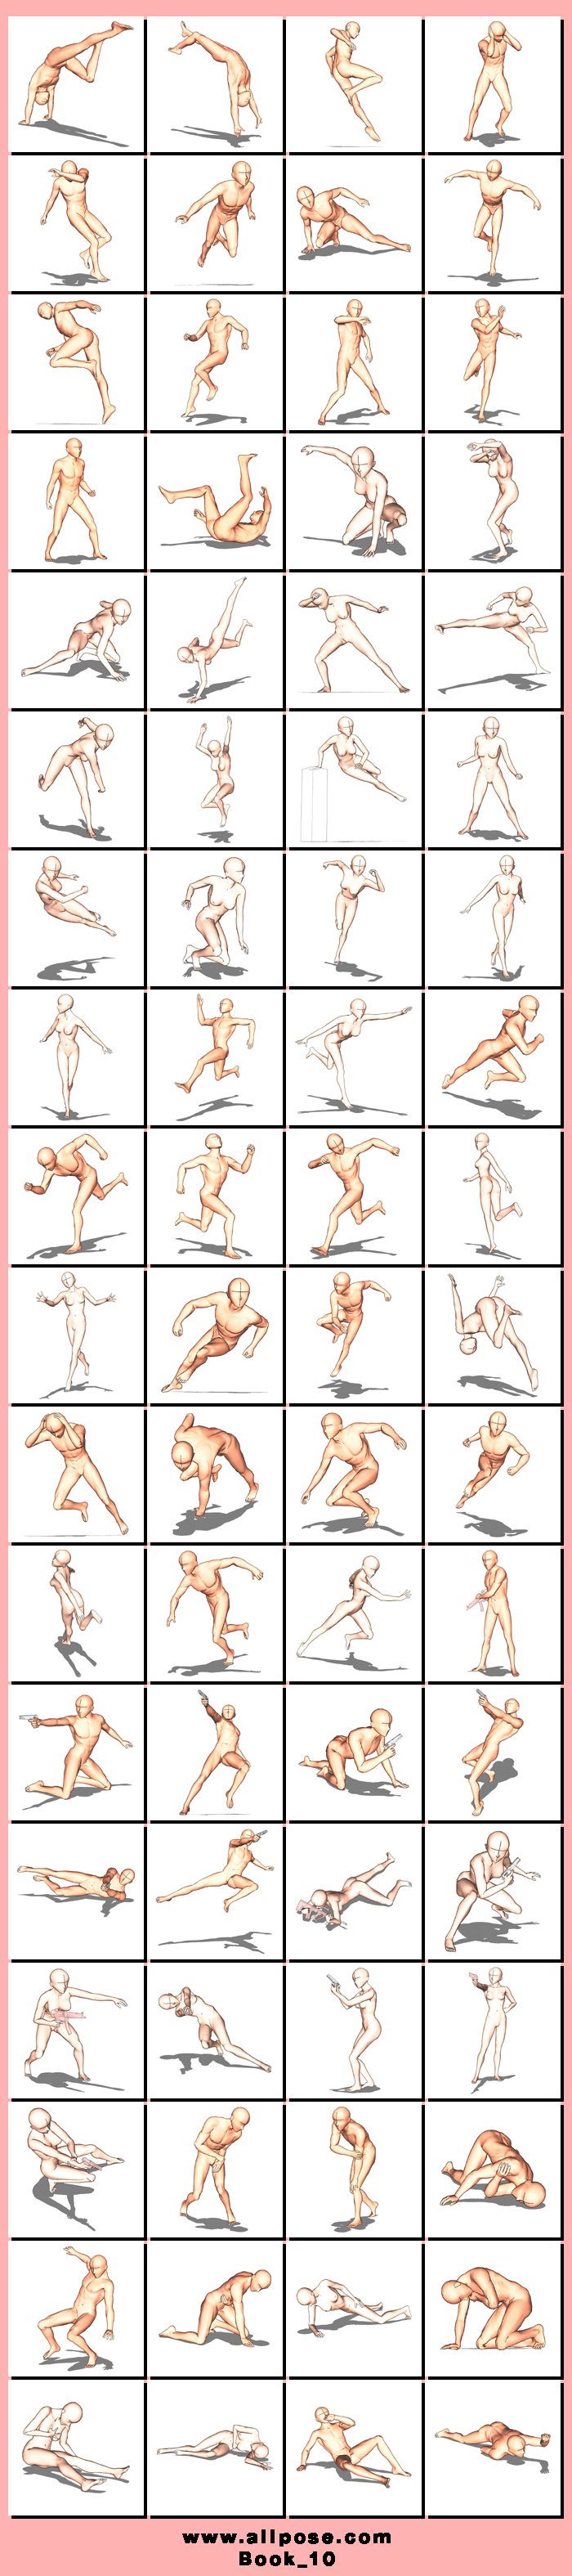 Poses. Action poses! LOVE it! Wish I’d had this chart when I was learning to draw! You’re welcome! ;)